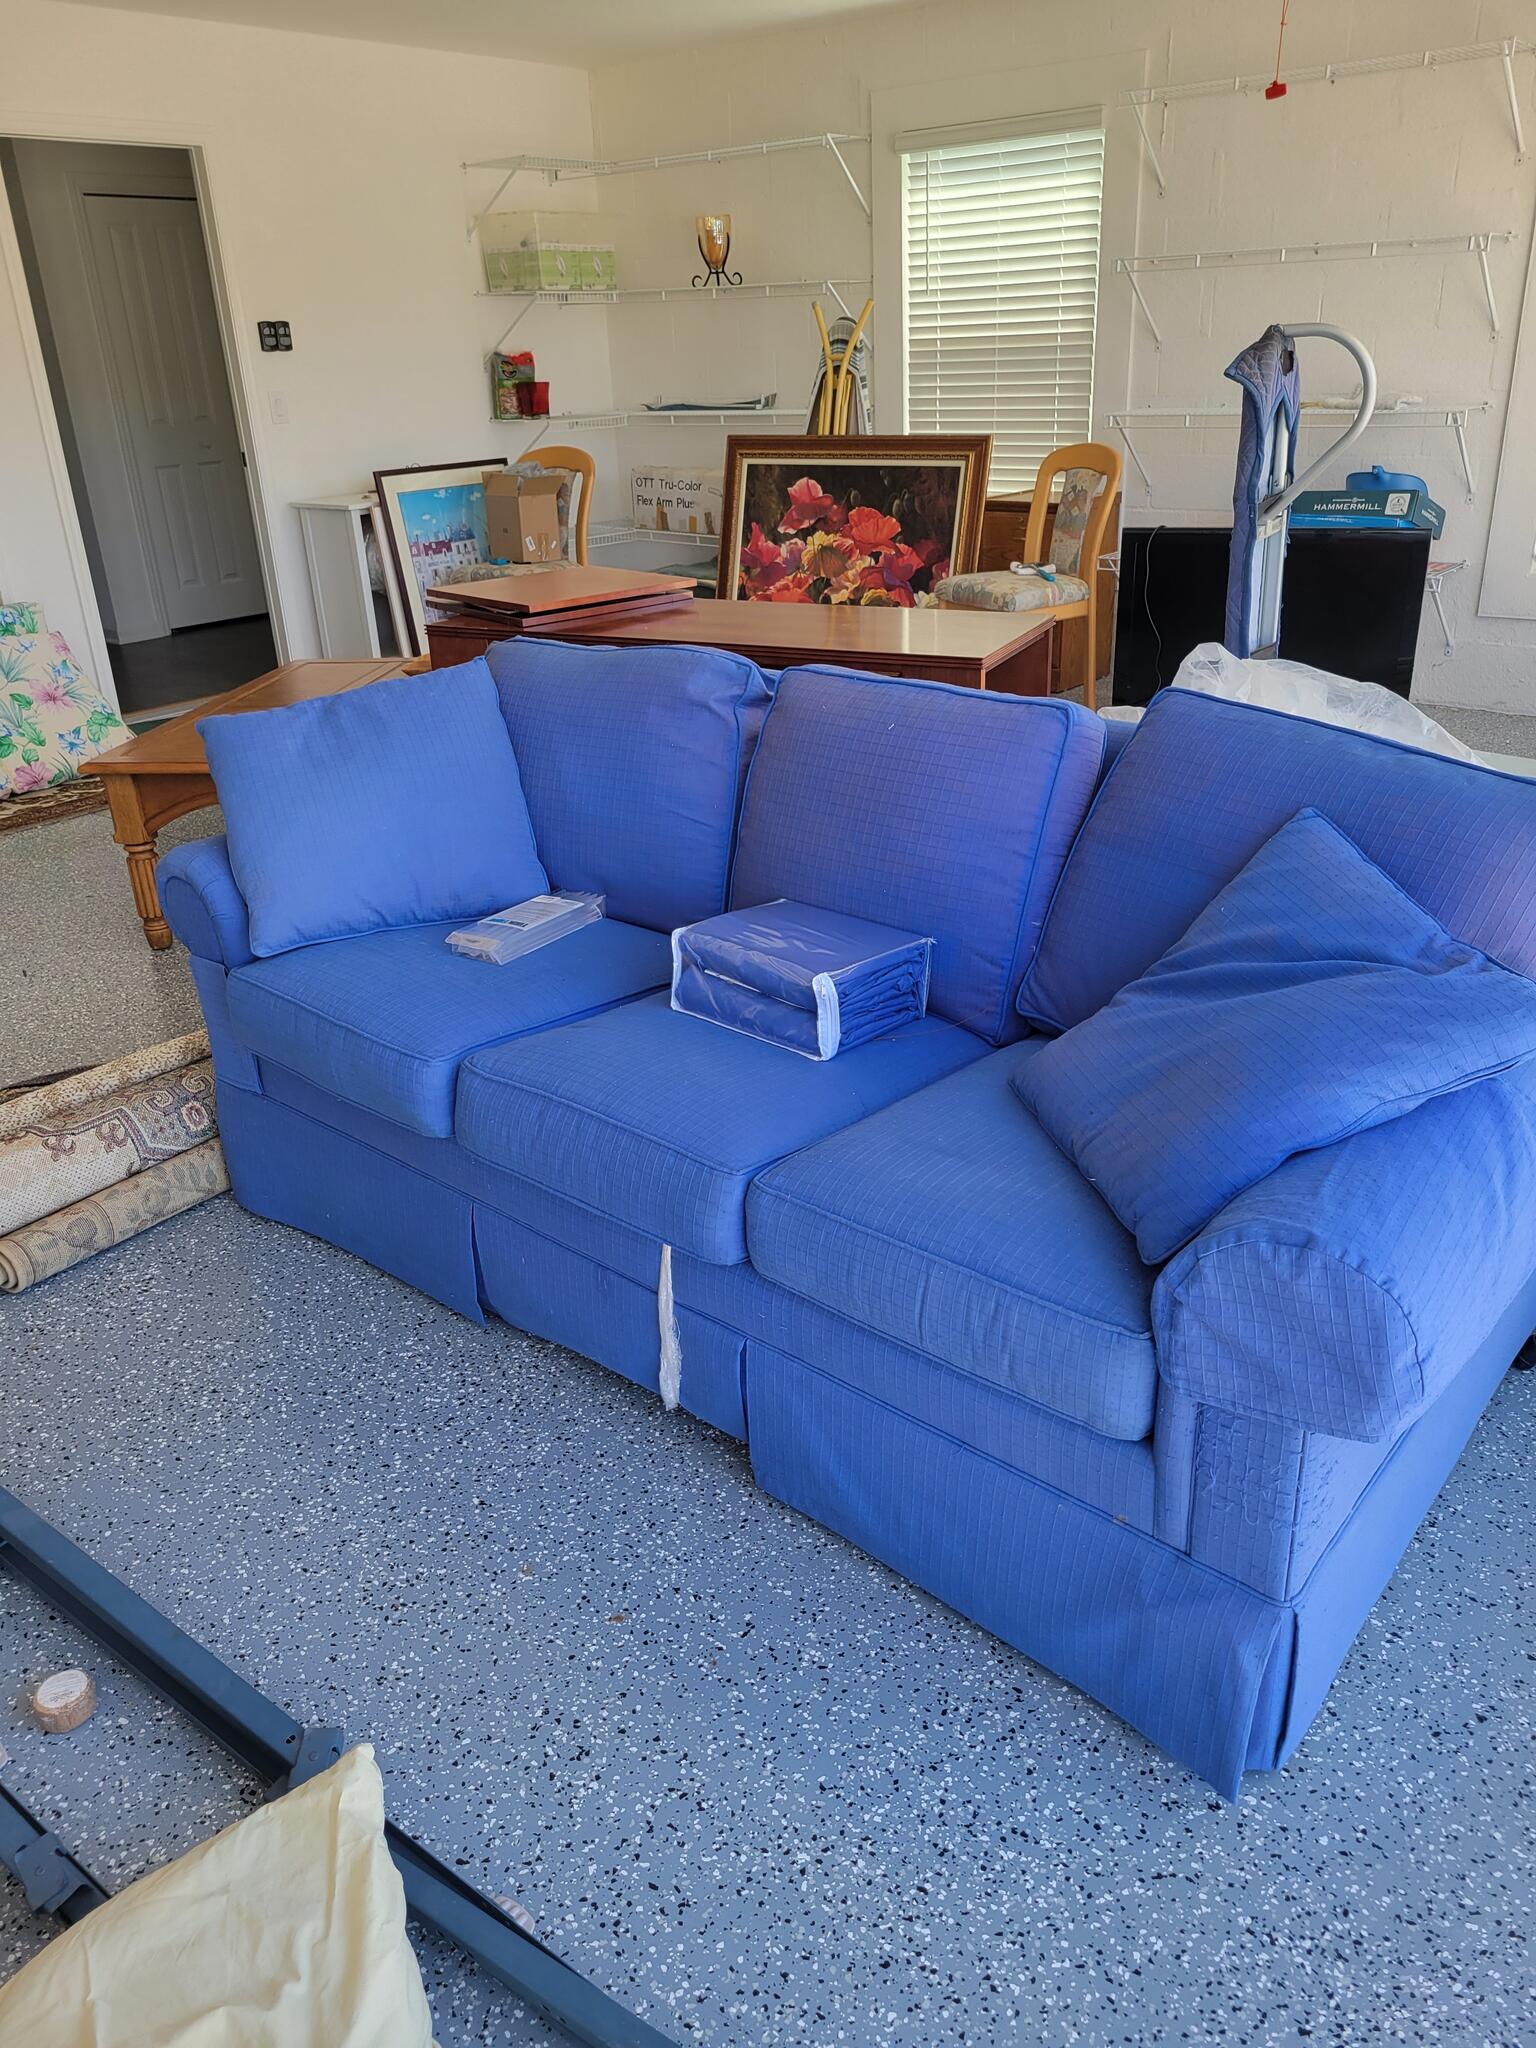 Queen Flexsteel Sleeper Sofa for Free in The Villages, FL | For Sale ...